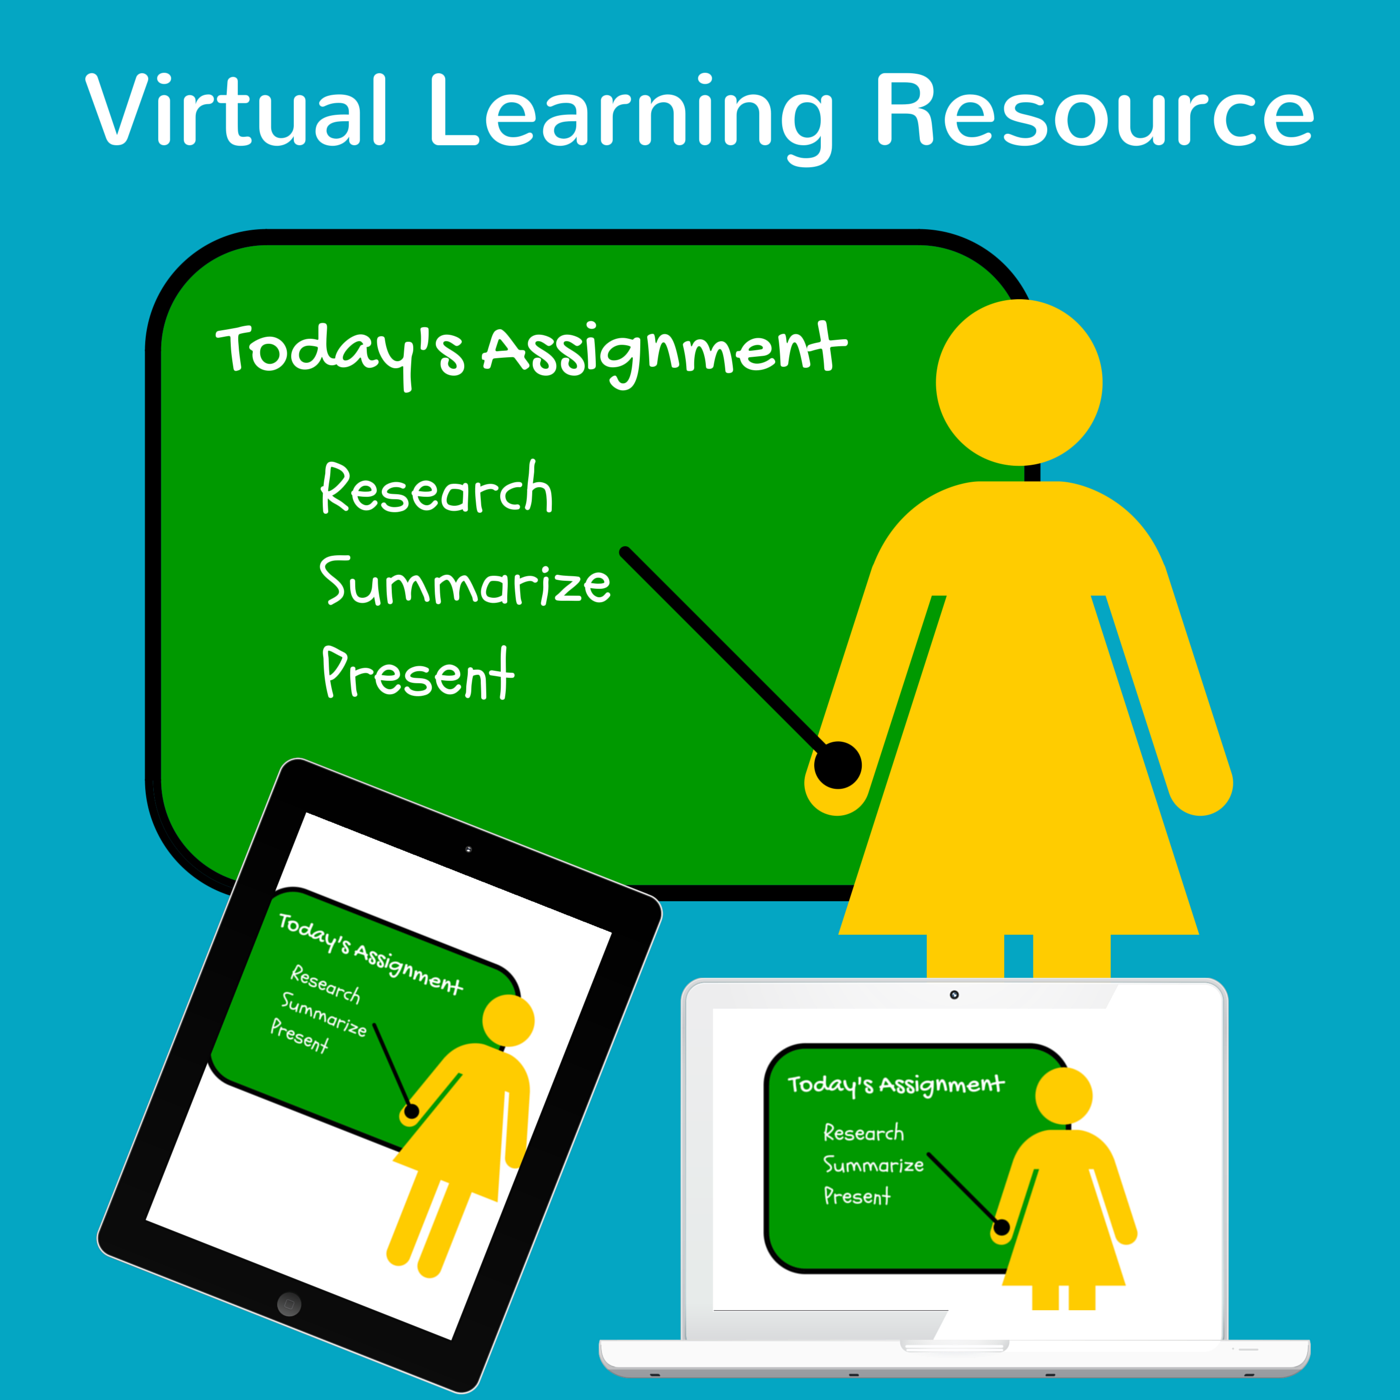 5 Great Ways to Organize and Share Digital Content for Your Virtual Lessons | EVSC ICATS